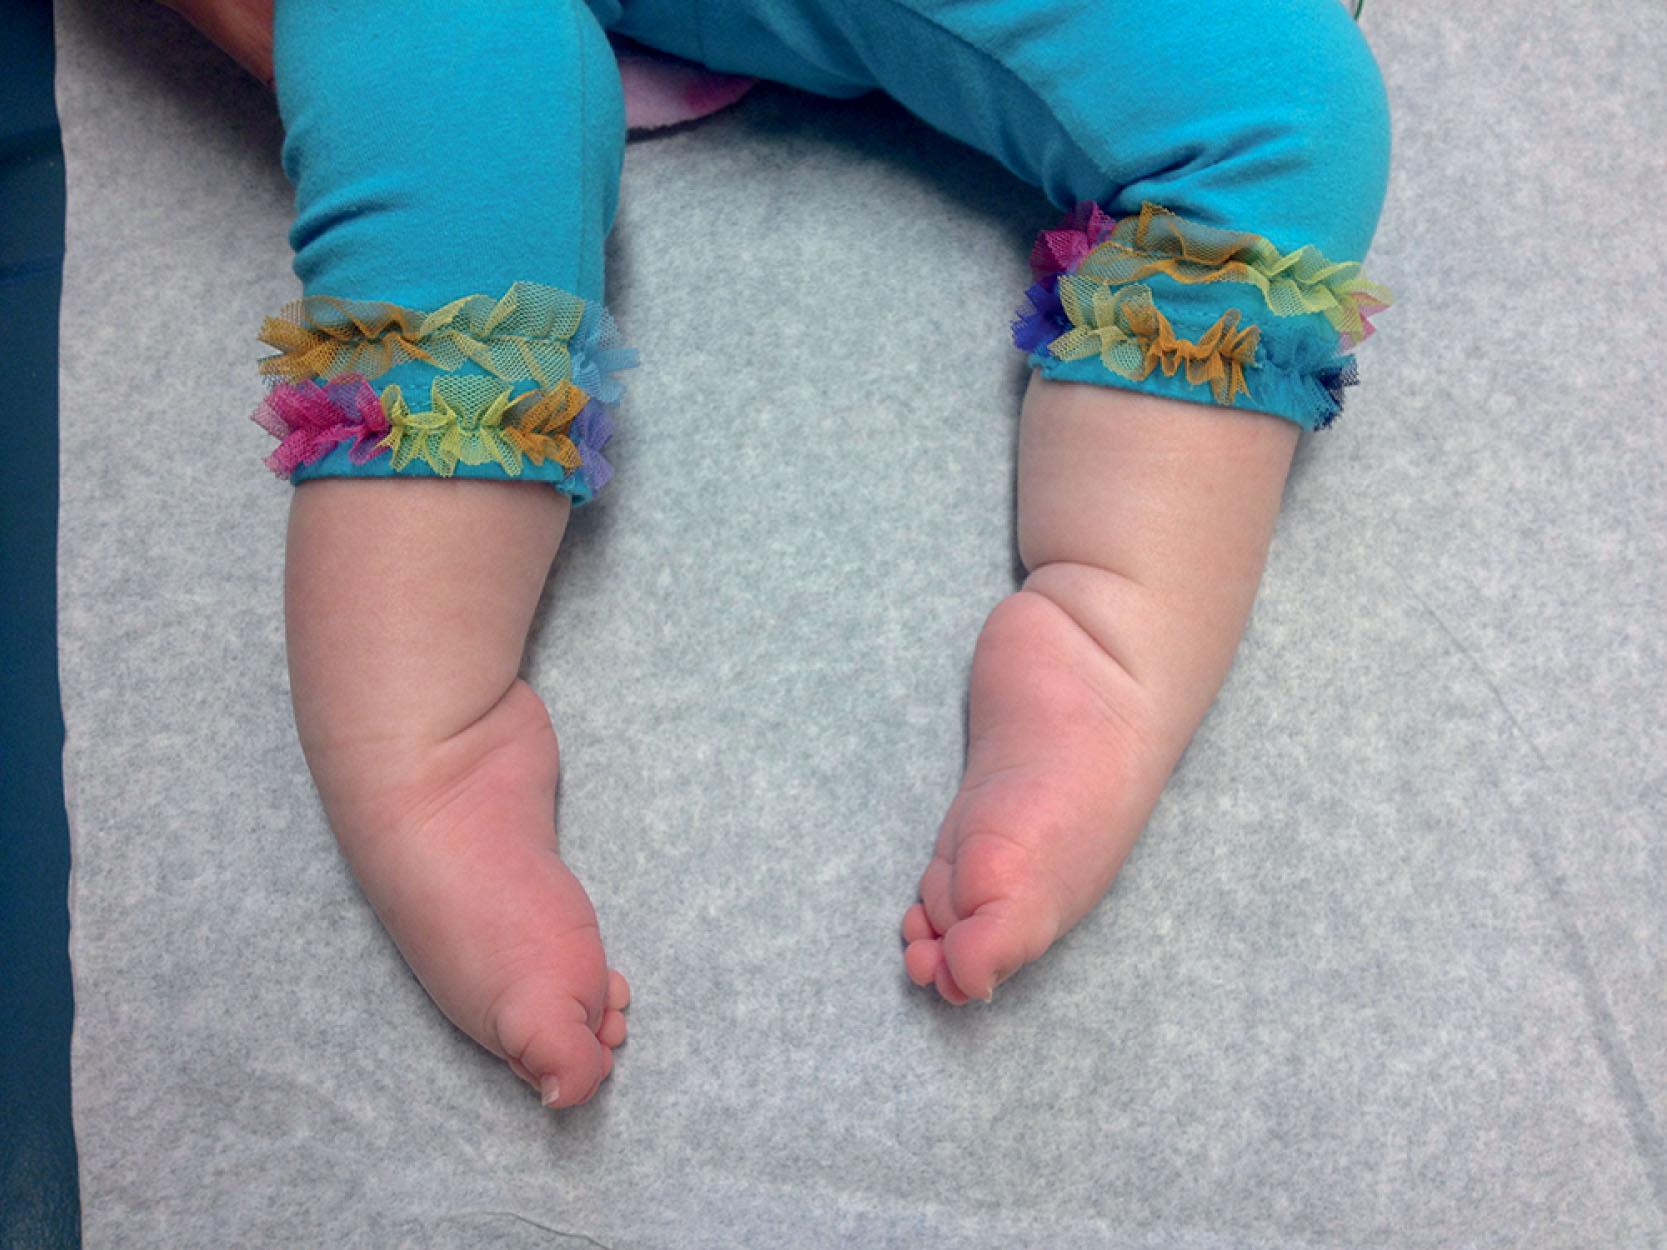 Fig. 37.3, Congenital myotonic dystrophy: club feet . This affected infant exhibits contractures at the ankles (club feet).